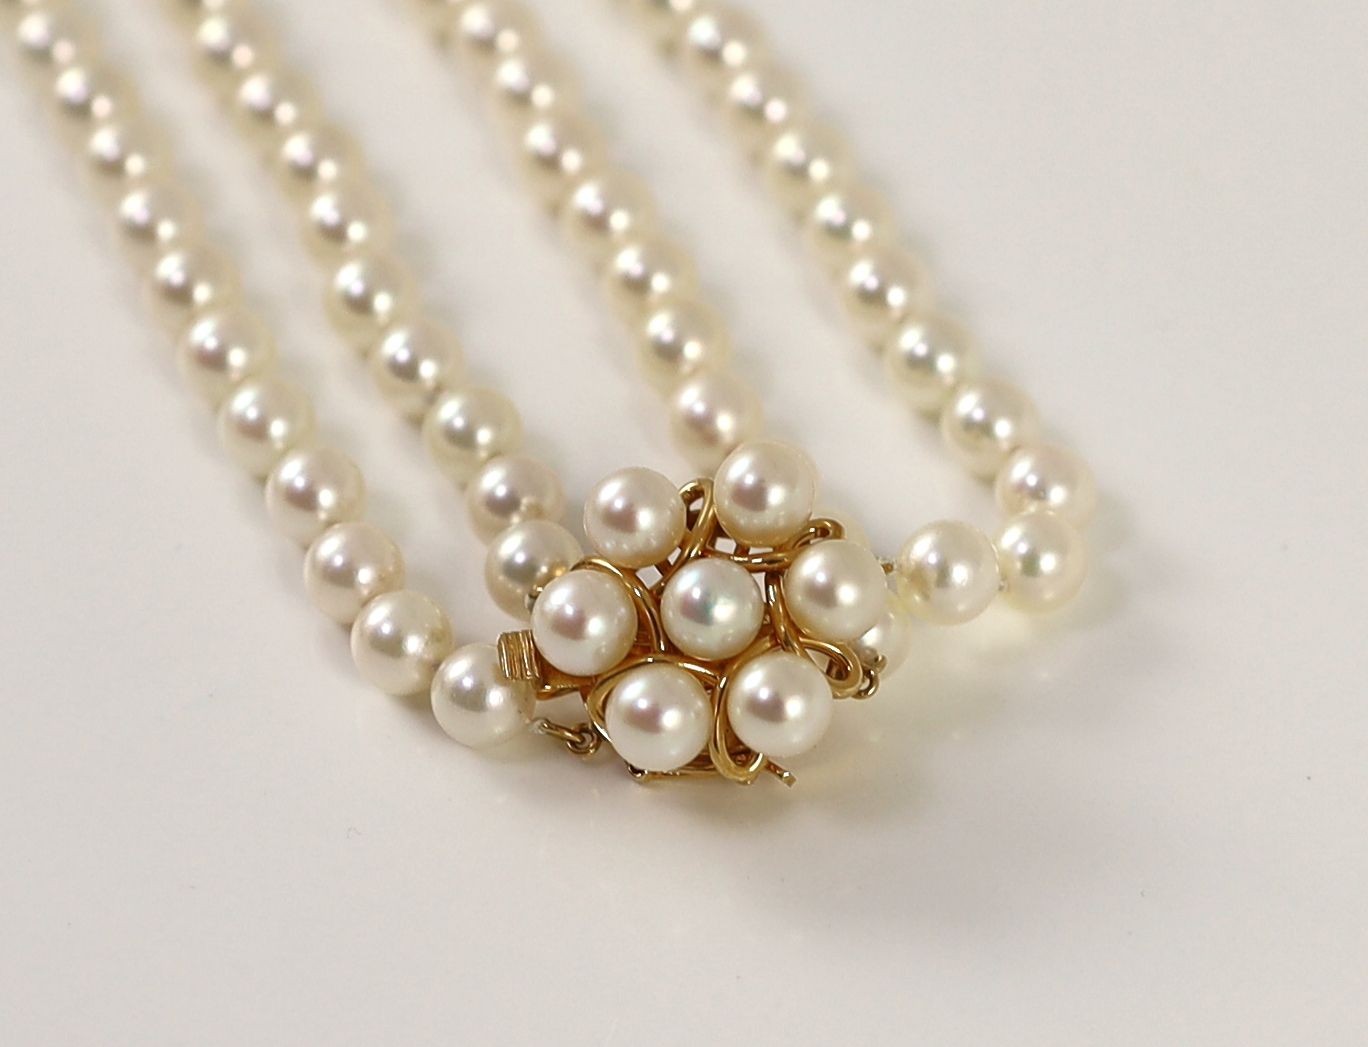 A modern continental double strand cultured pearl necklace with 14k gold and cultured pearl cluster set clasp and a matching bracelet